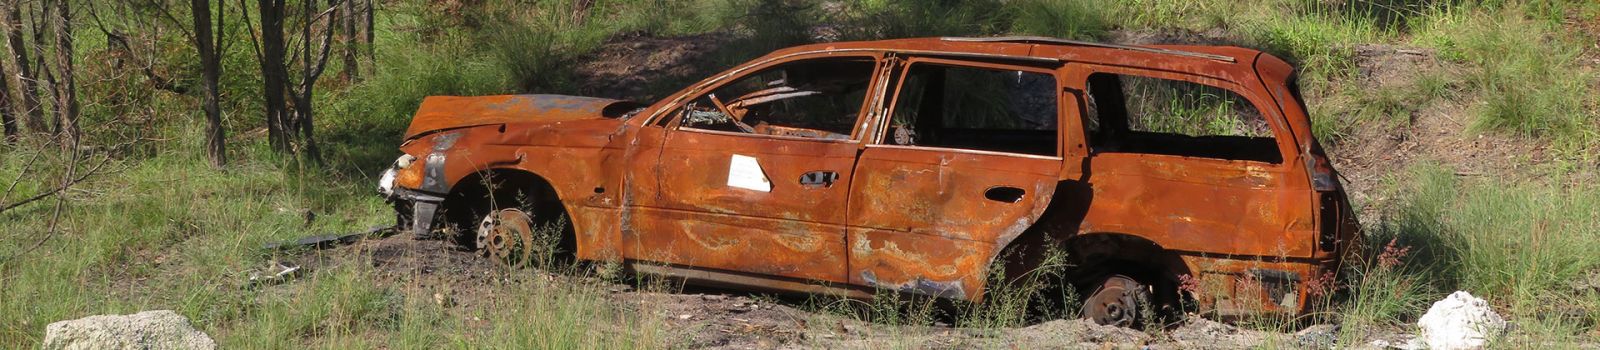 Image of a burnt out car on the side of the road banner image